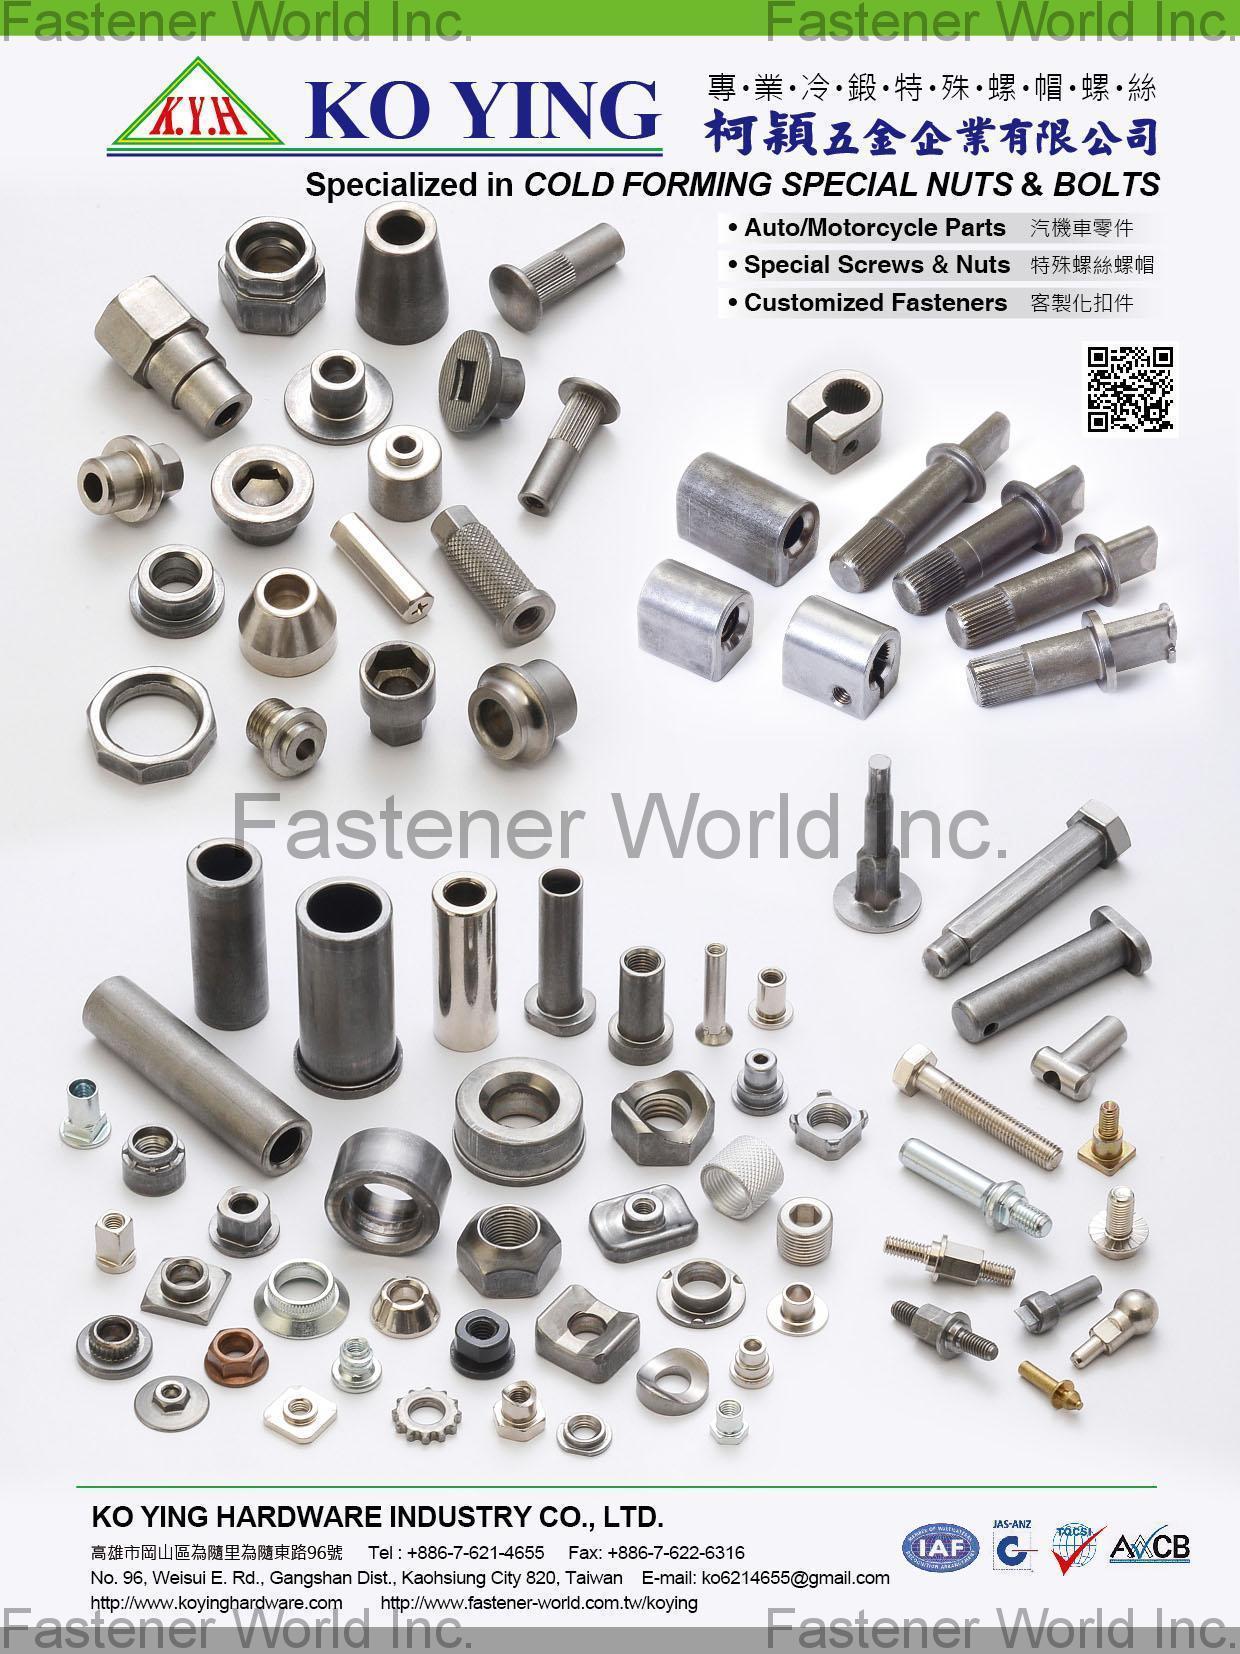 KO YING HARDWARE INDUSTRY CO., LTD. , Motorcycle Fasteners, Automotive Fasteners, Construction Fasteners, Furniture Fasteners, Customize Fasteners , Automotive Parts